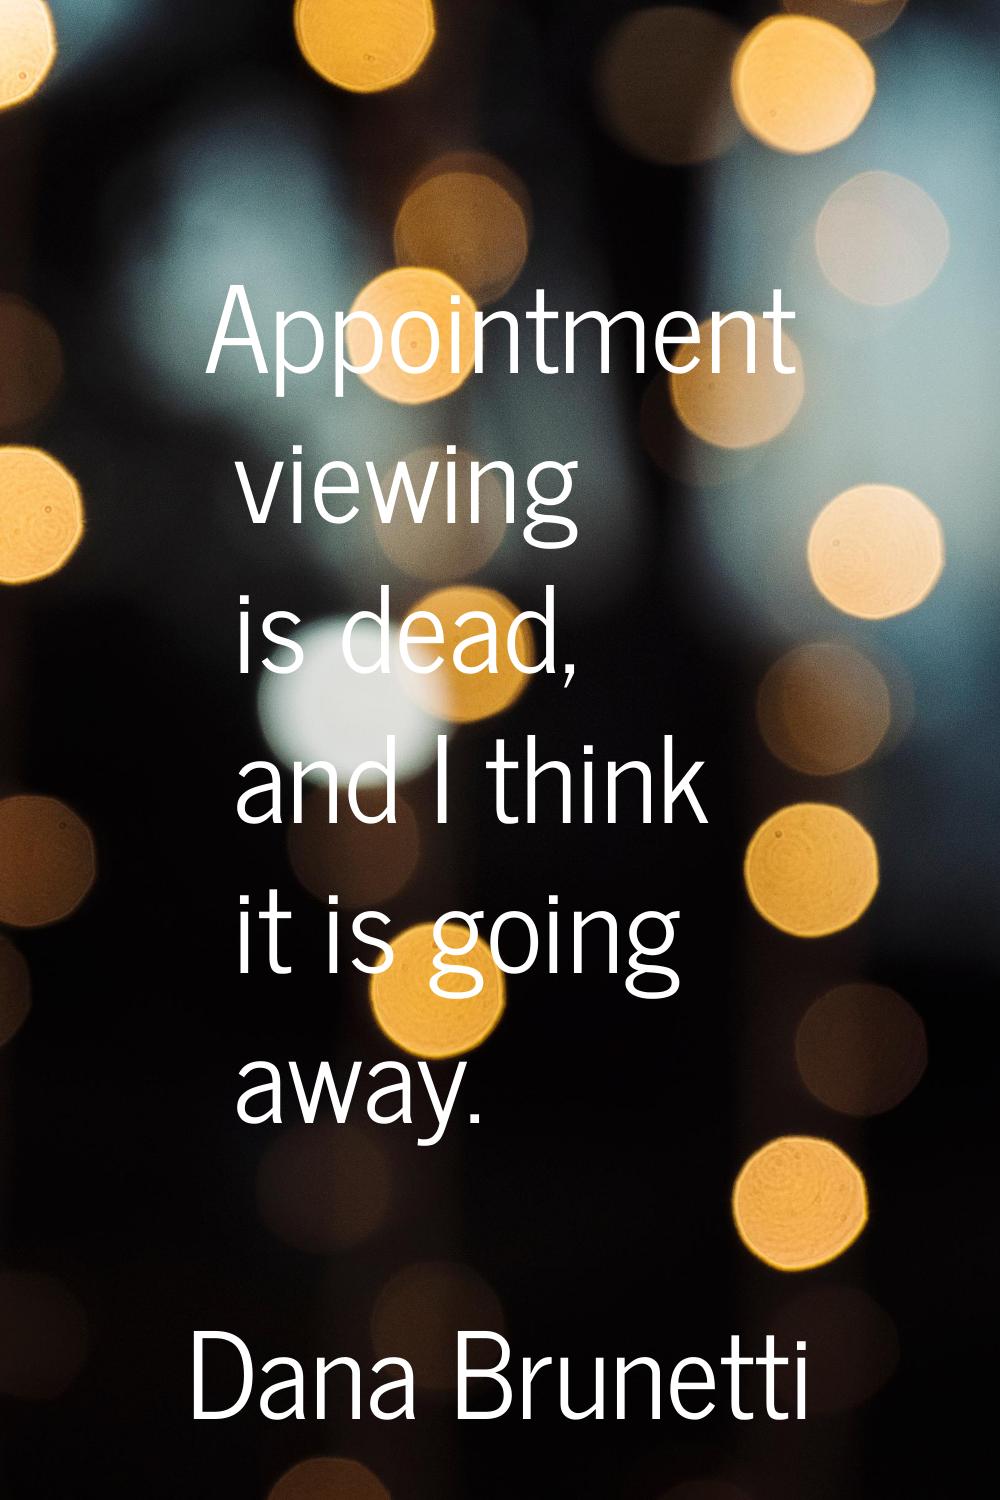 Appointment viewing is dead, and I think it is going away.